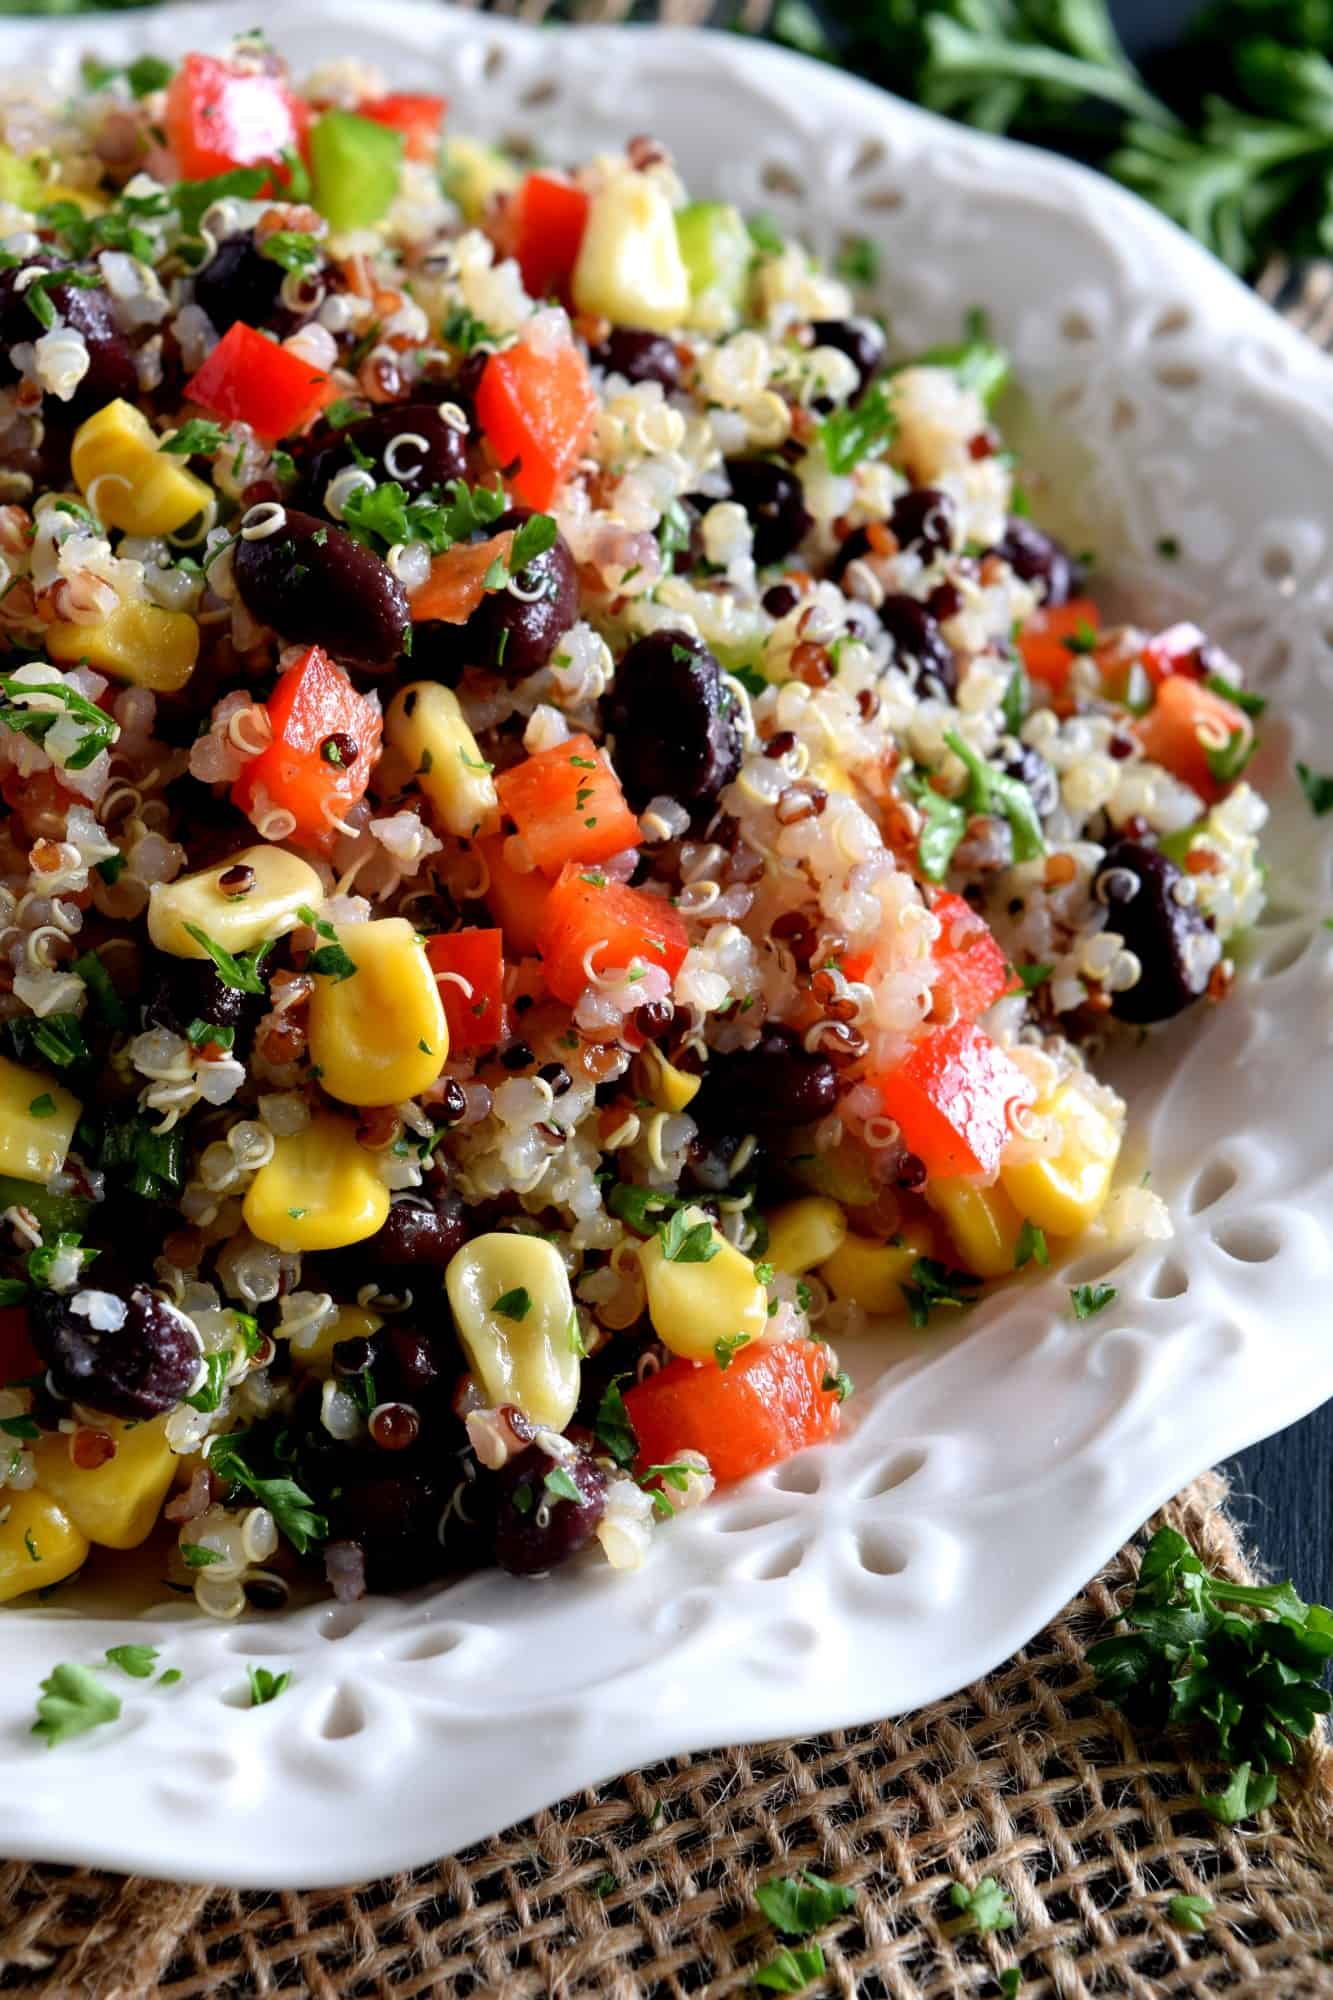 Quinoa: The Superfood Star of Healthy and Delicious Meals